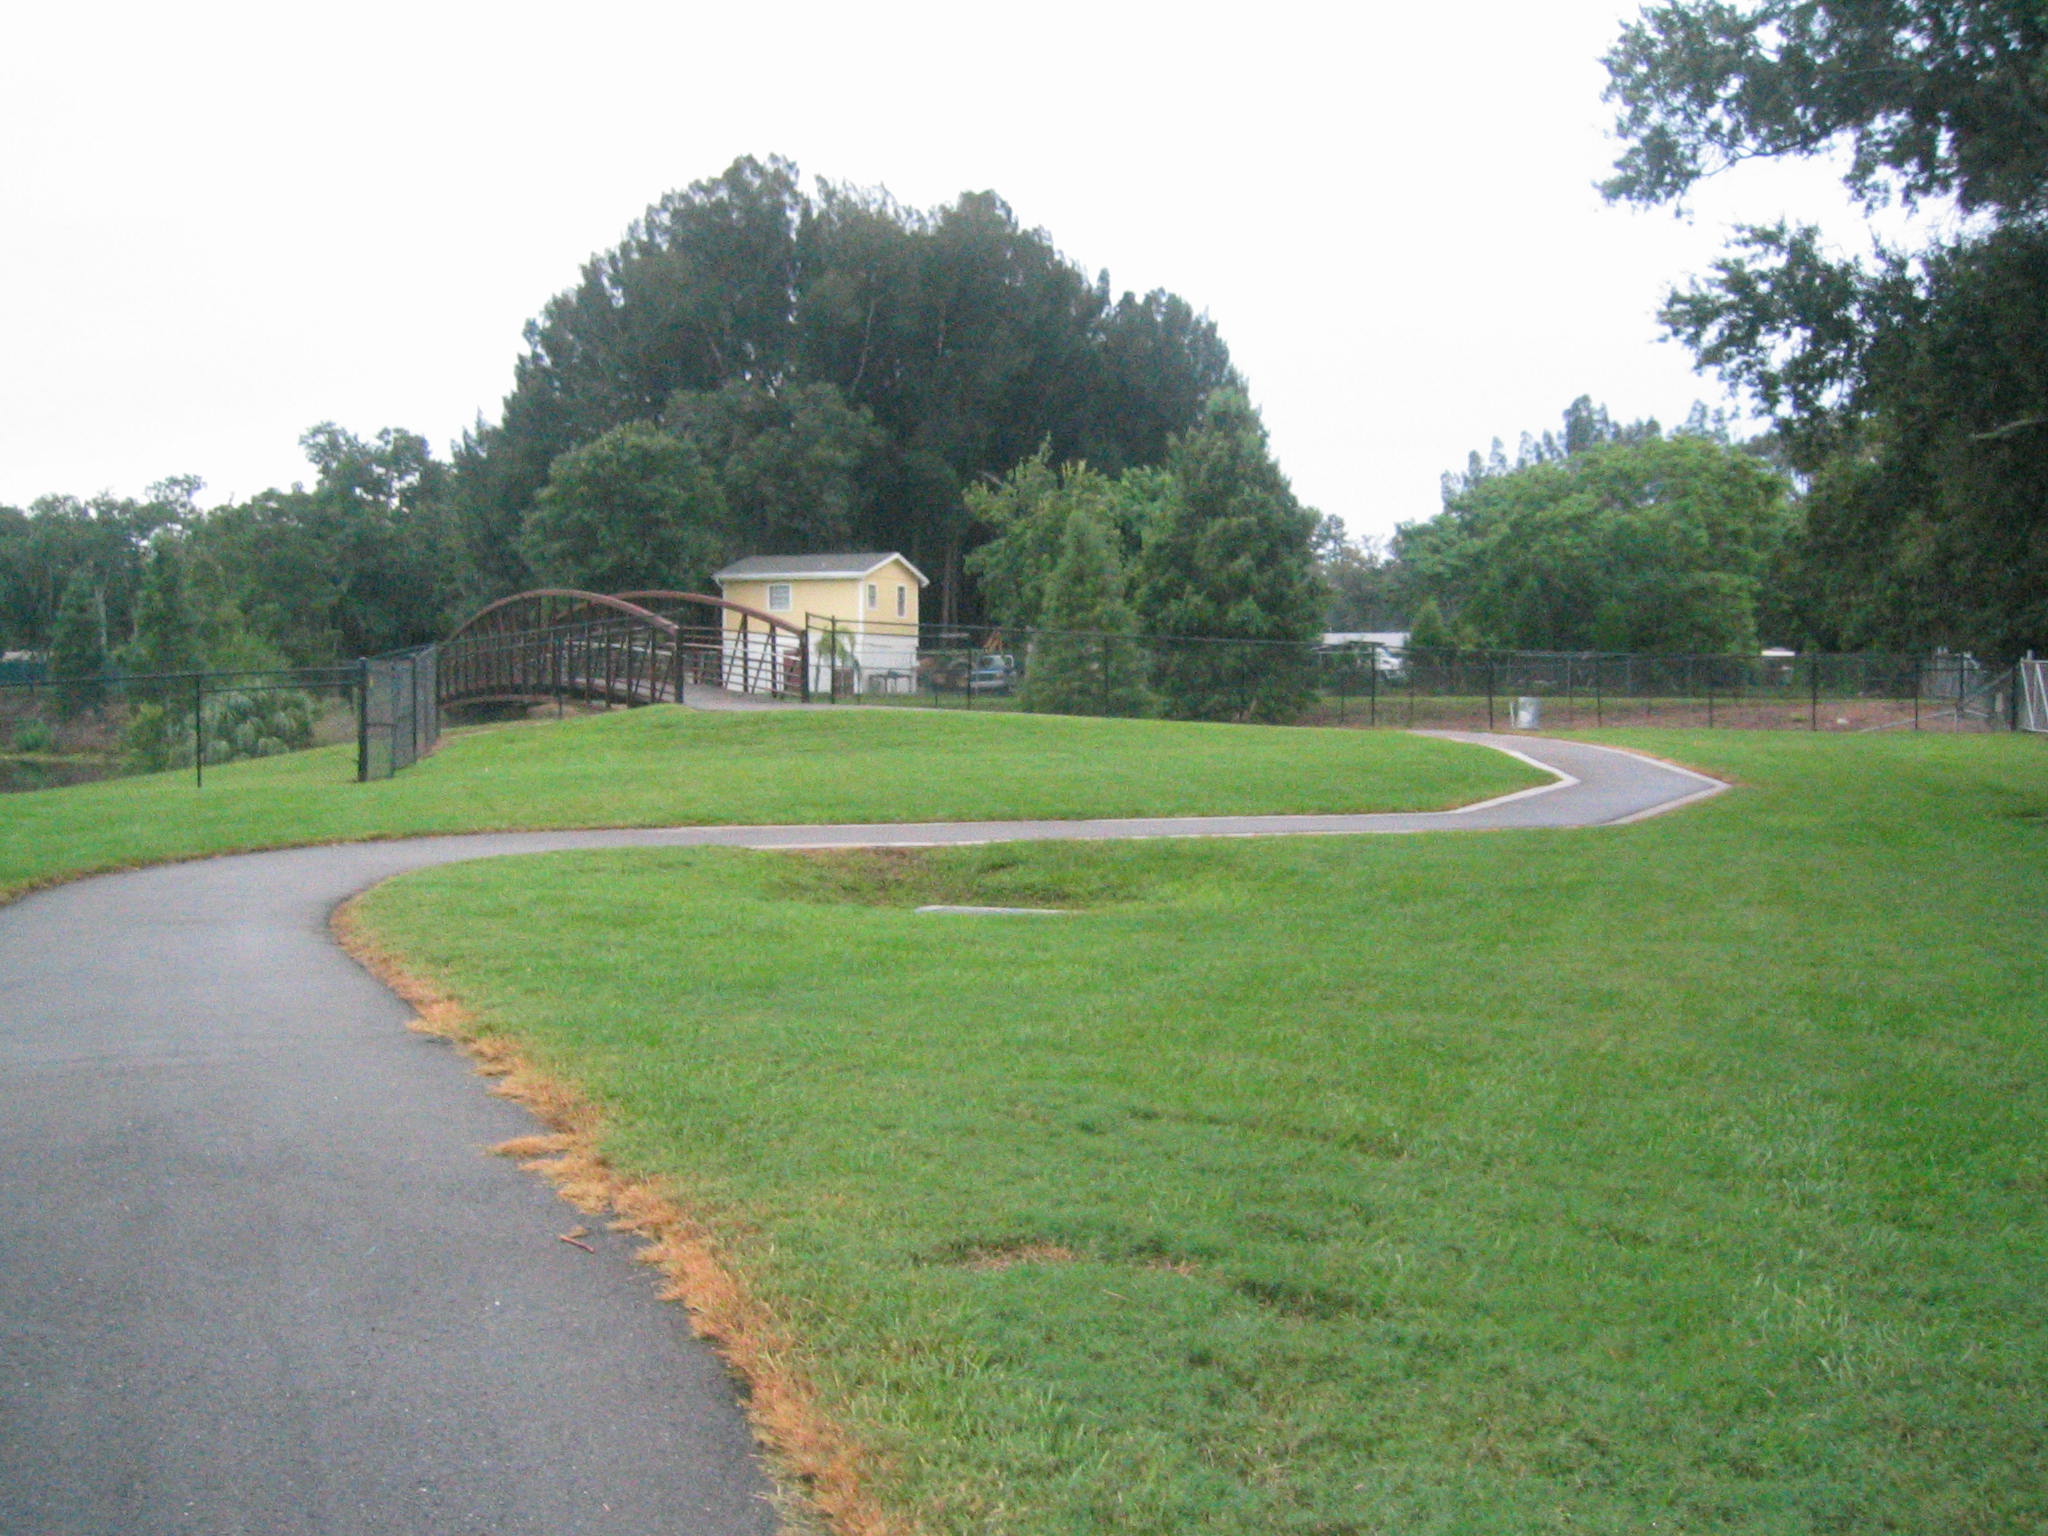 a road winding toward a grassy hill in a park